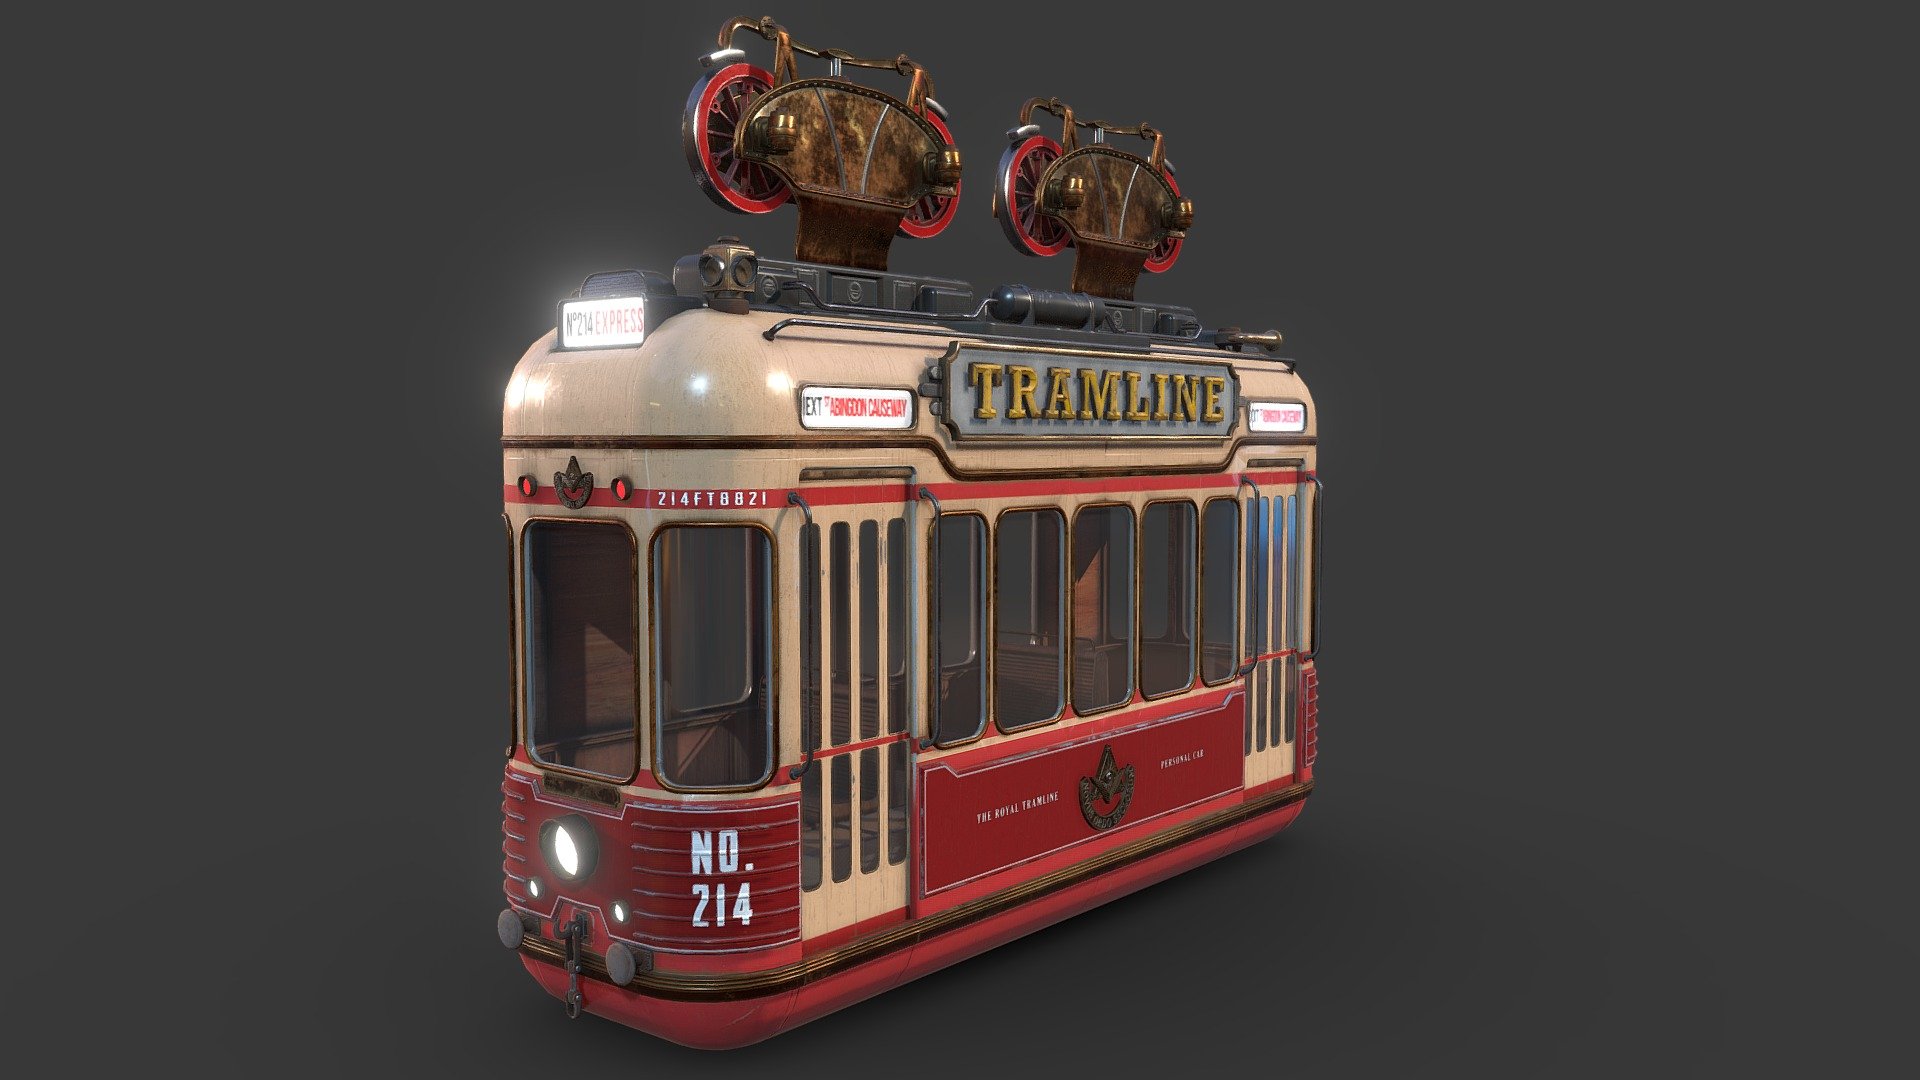 I made this monorail in the last 2 months. It is part of a game project I am working on. It has 8 seats and up to 6 more standing places. It runs in a hanging rail system and connects different groups of islands.
You can see more about the Steam Tram on Artstation



 - The Royal Tramline - 3D model by Valentin Winkelmann (@valentinwinkelmann) 3d model